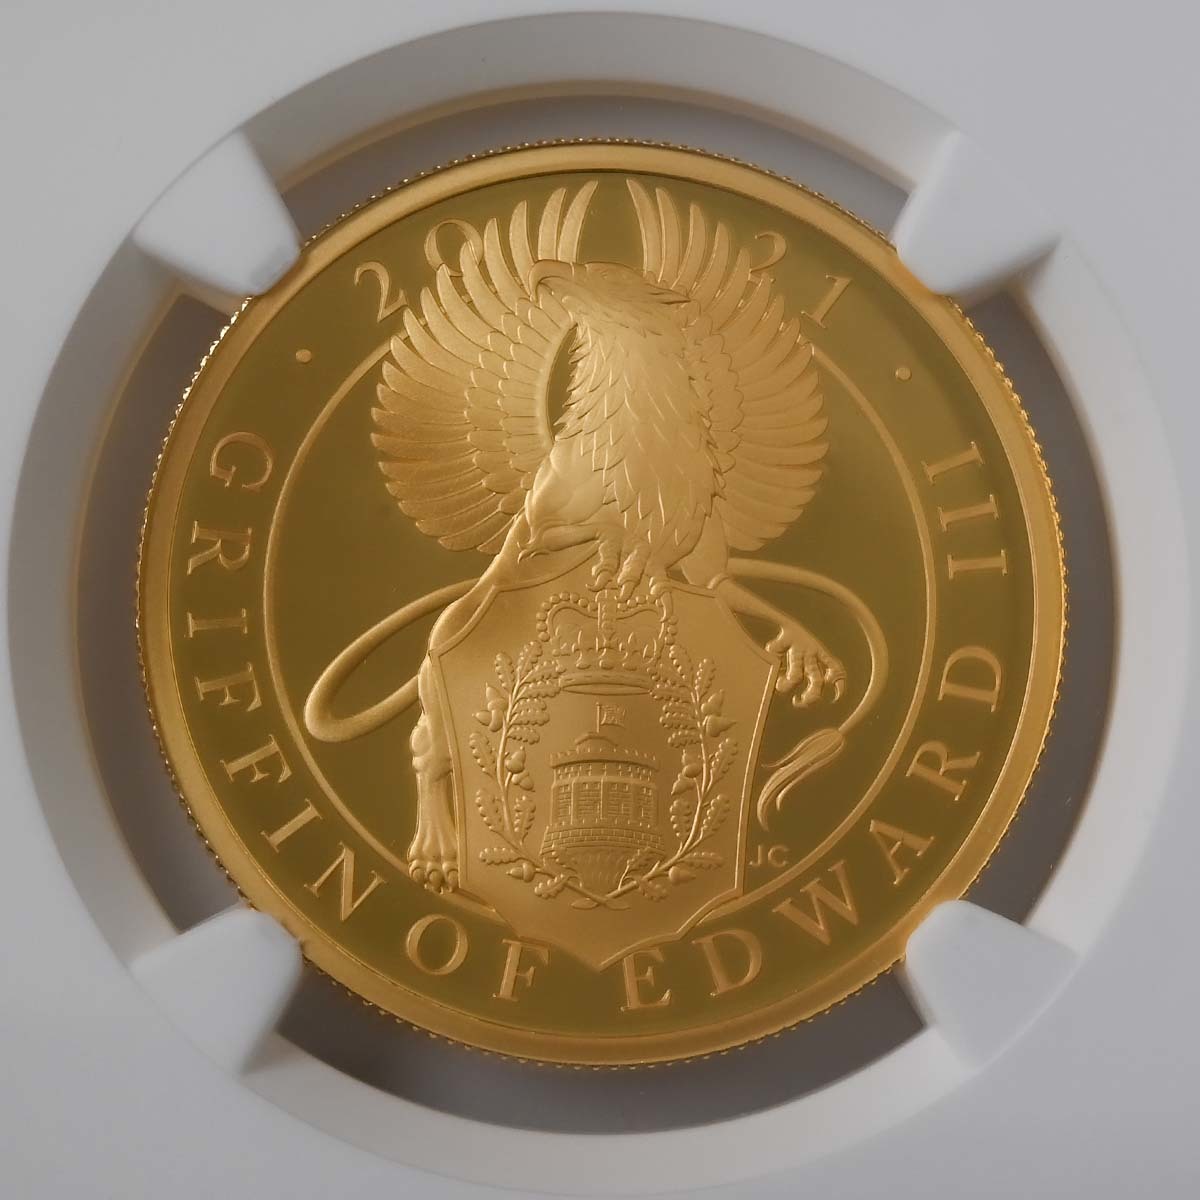 UK21QGGP 2021 Griffin of Edward III 1 Ounce Gold Proof PF 70 First Releases Reverse